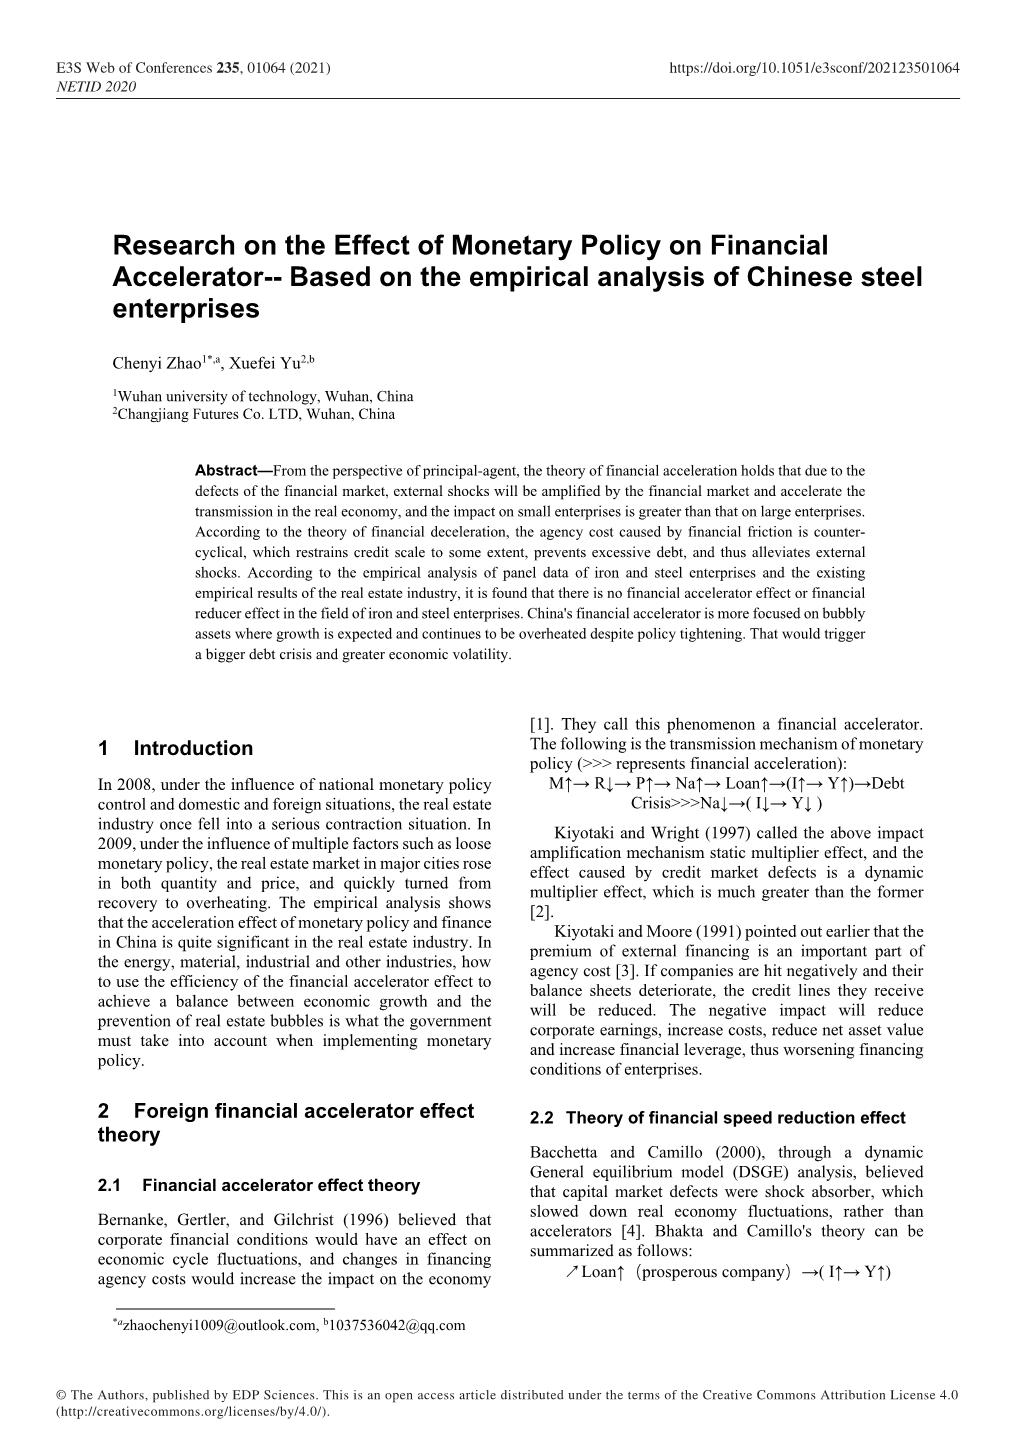 Research on the Effect of Monetary Policy on Financial Accelerator-- Based on the Empirical Analysis of Chinese Steel Enterprises